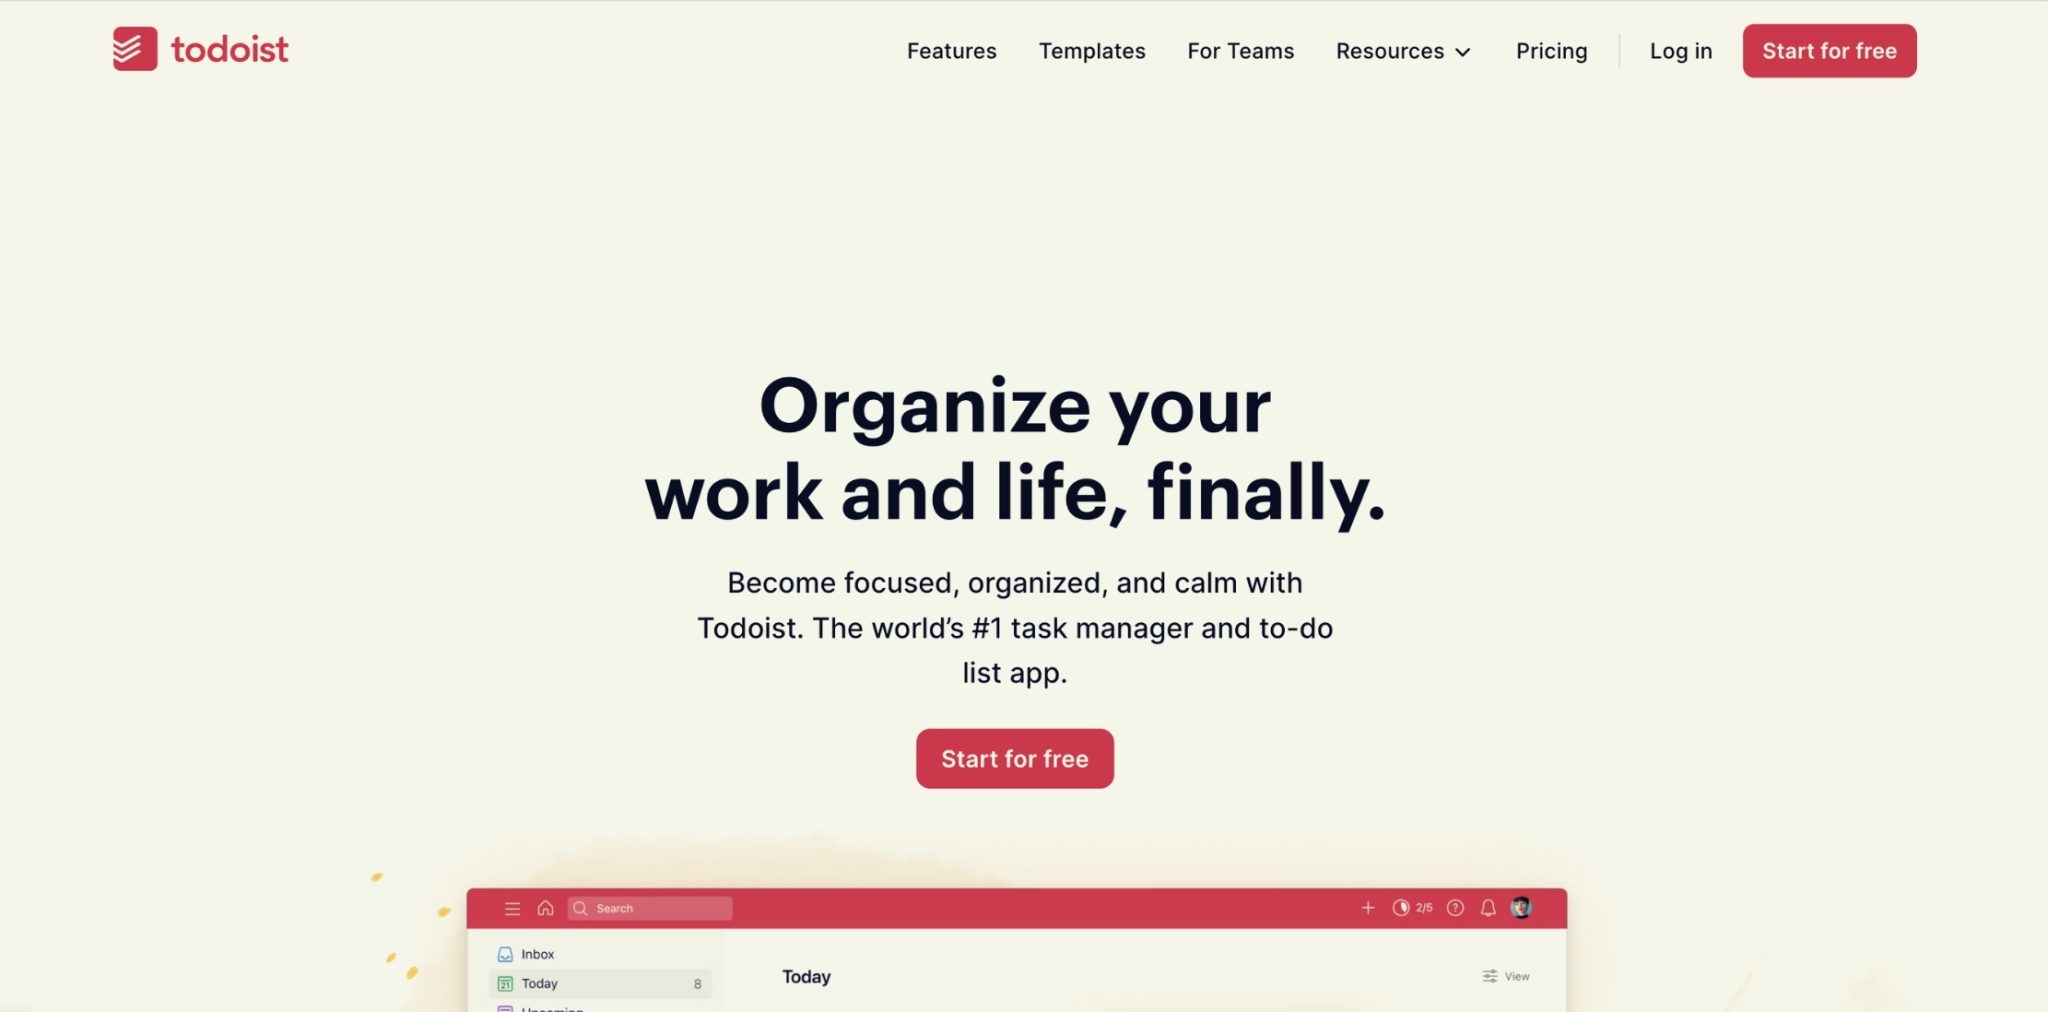 Image of the home page of todoist, a task management tool